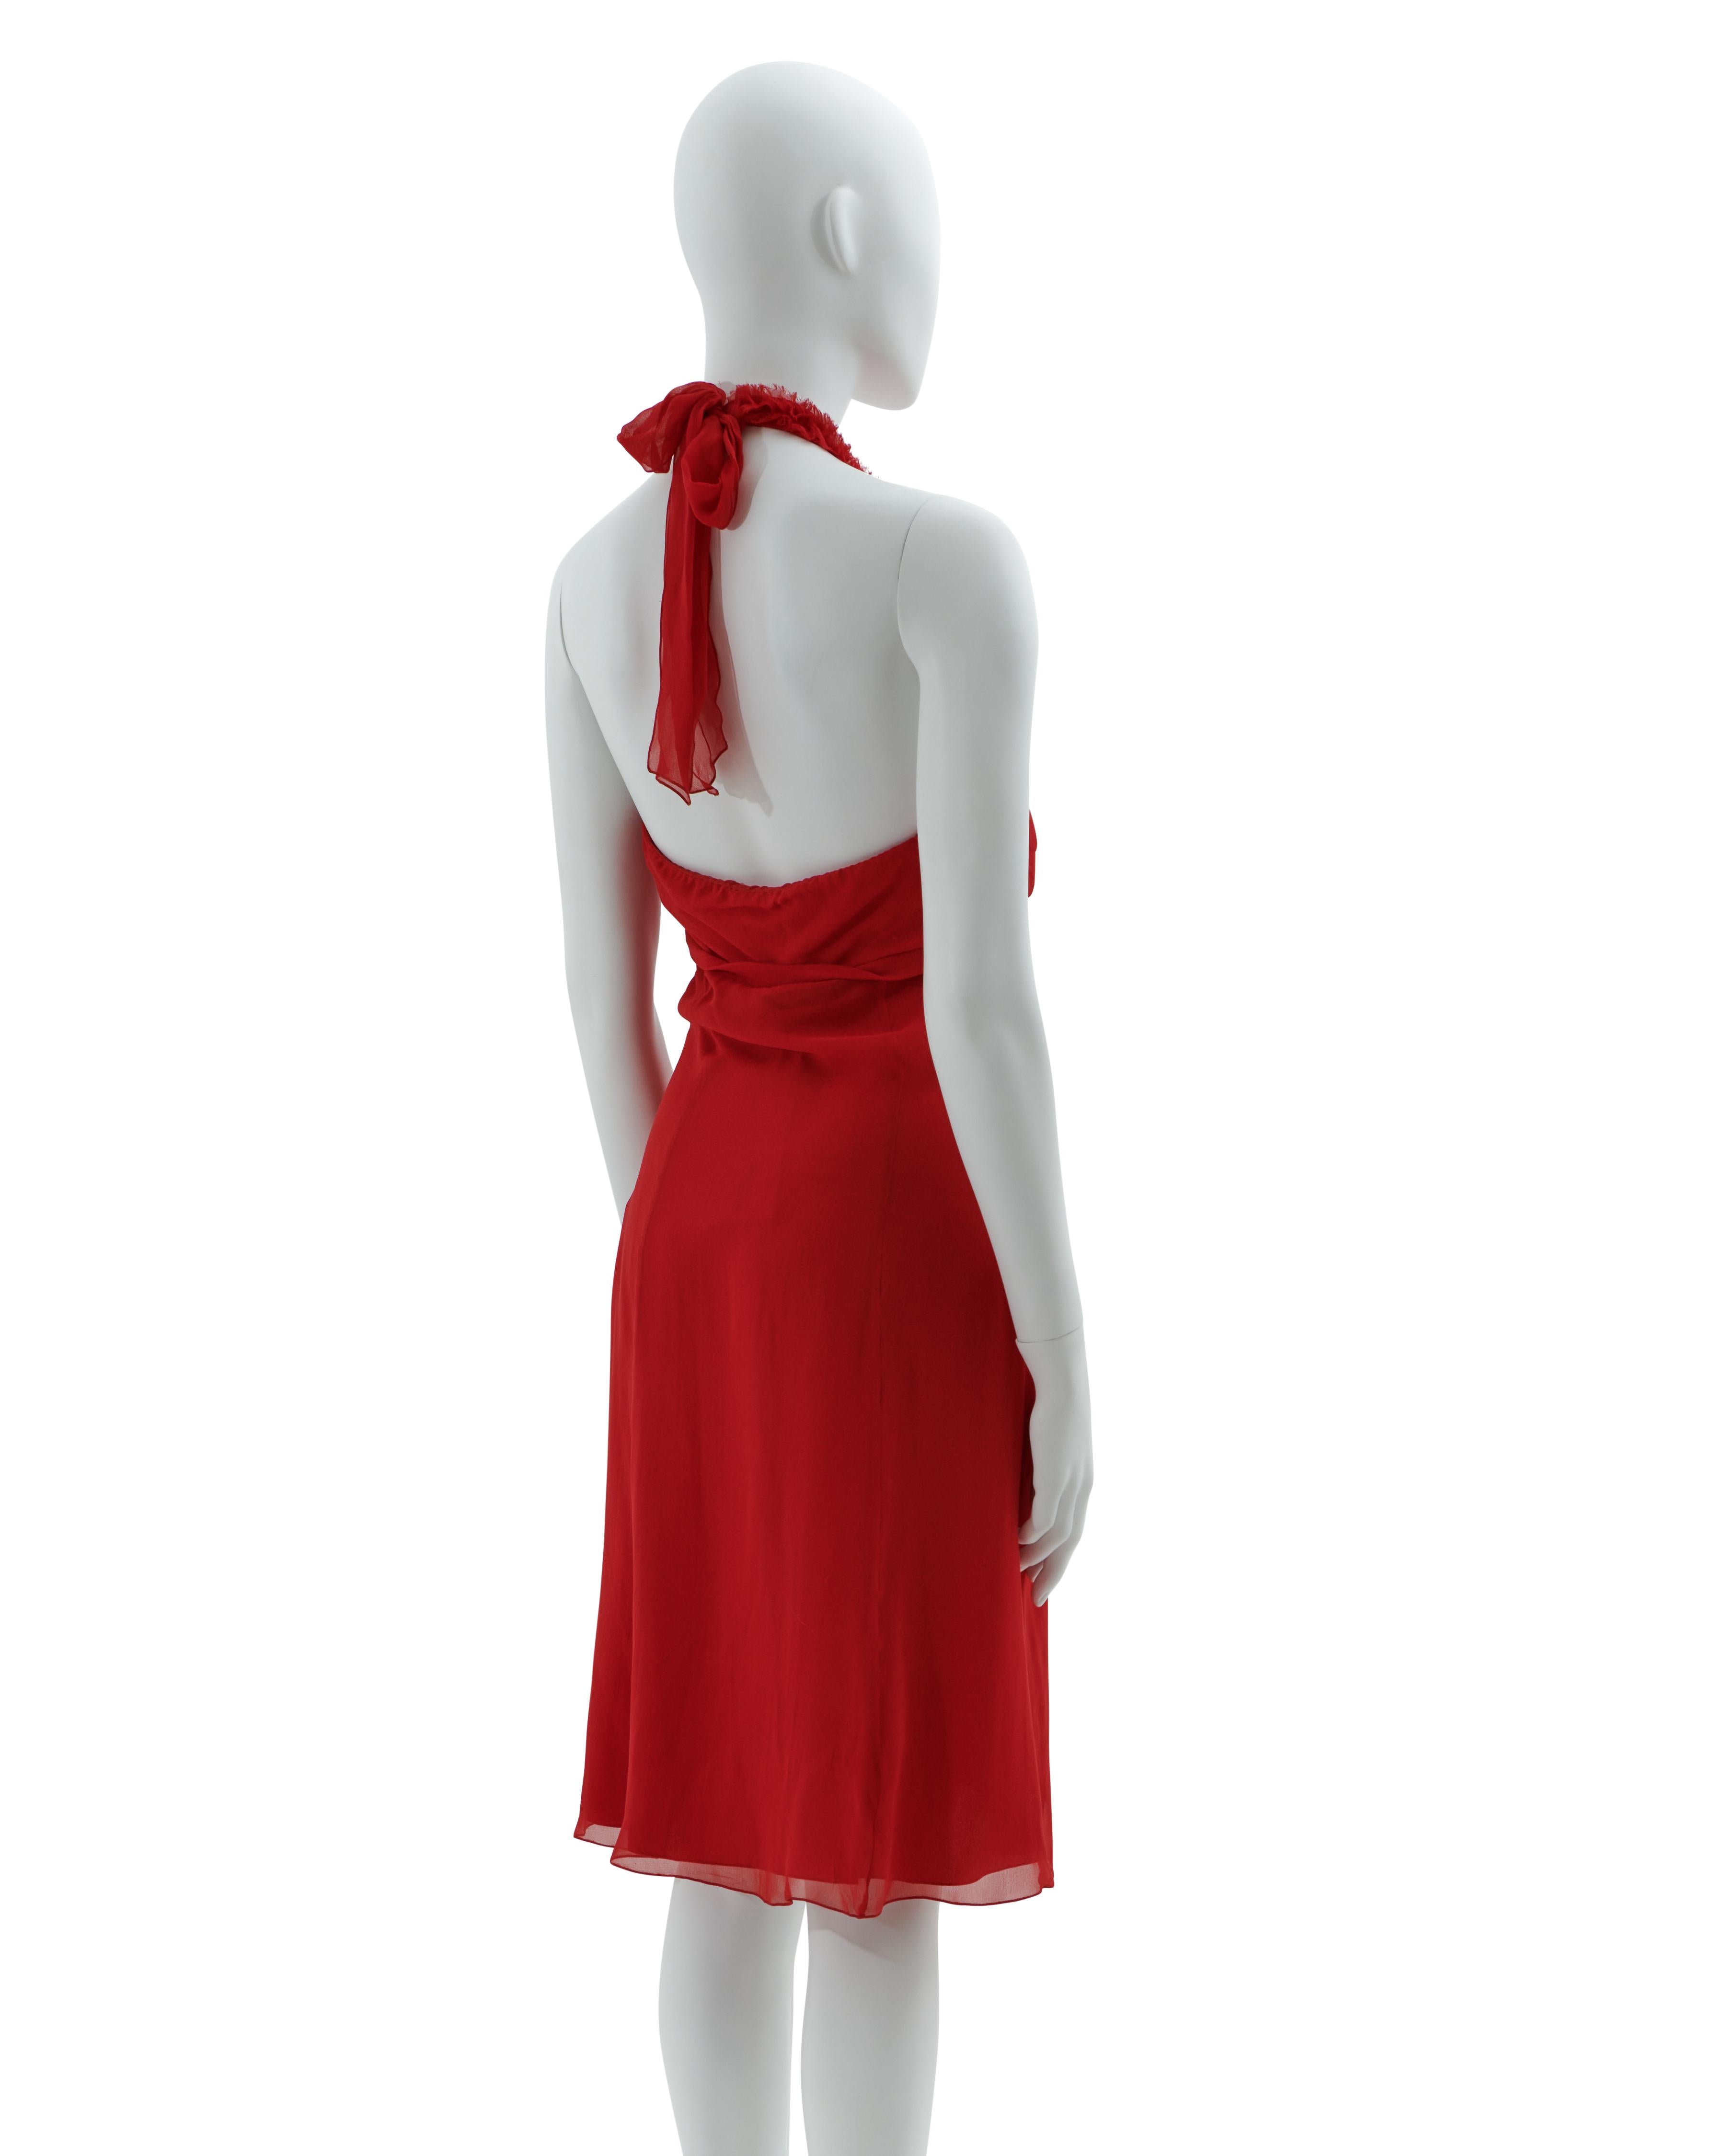 Women's Valentino S/S 2007 Red halter neck chiffon cocktail dress For Sale